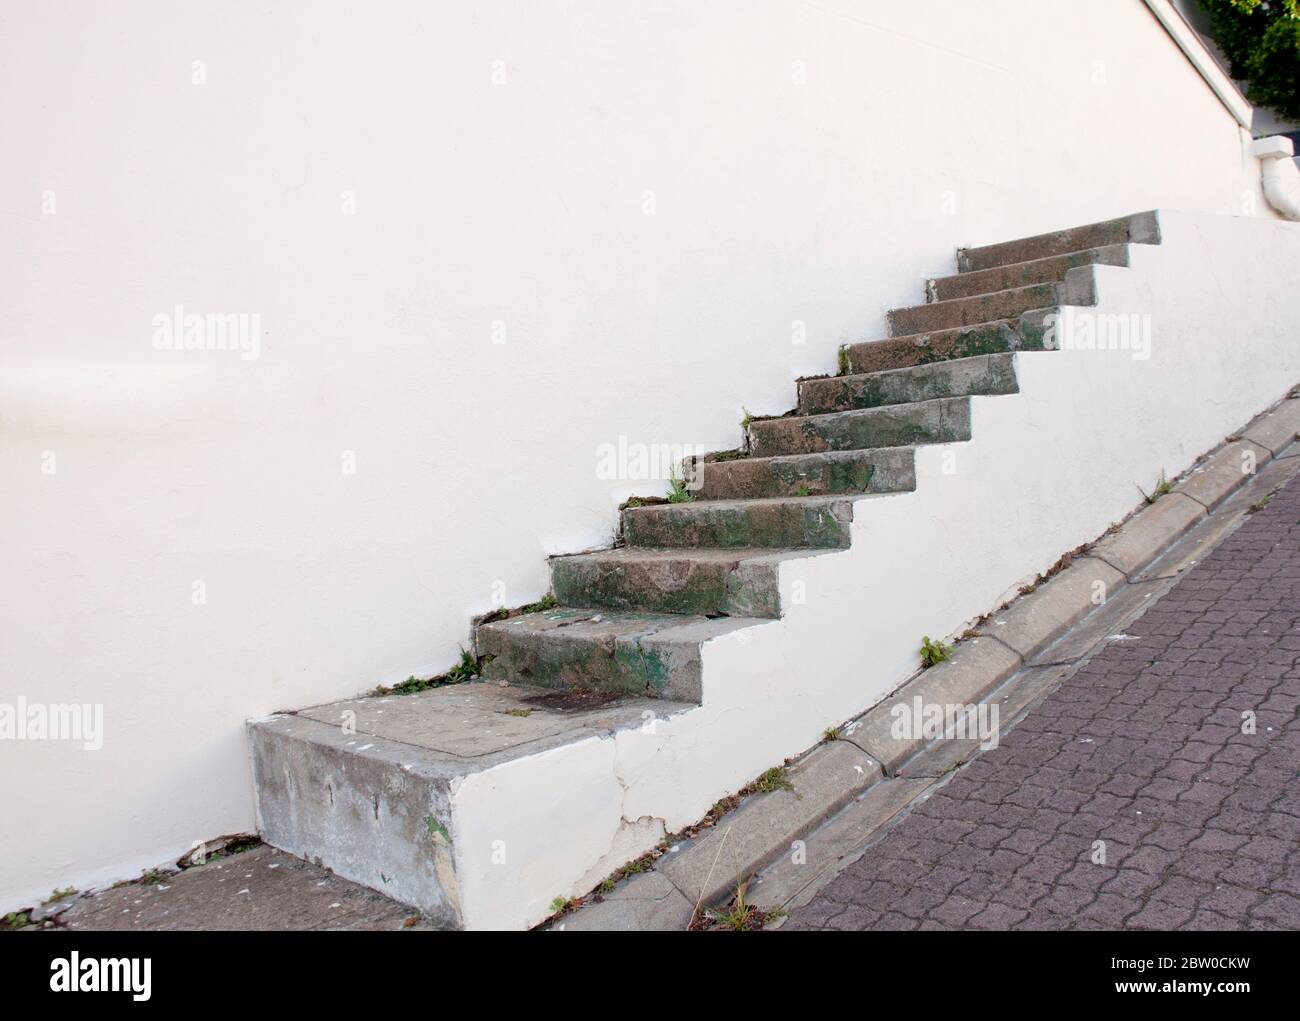 Eleven concrete steps ascending a wall, going up to nowhere Stock Photo